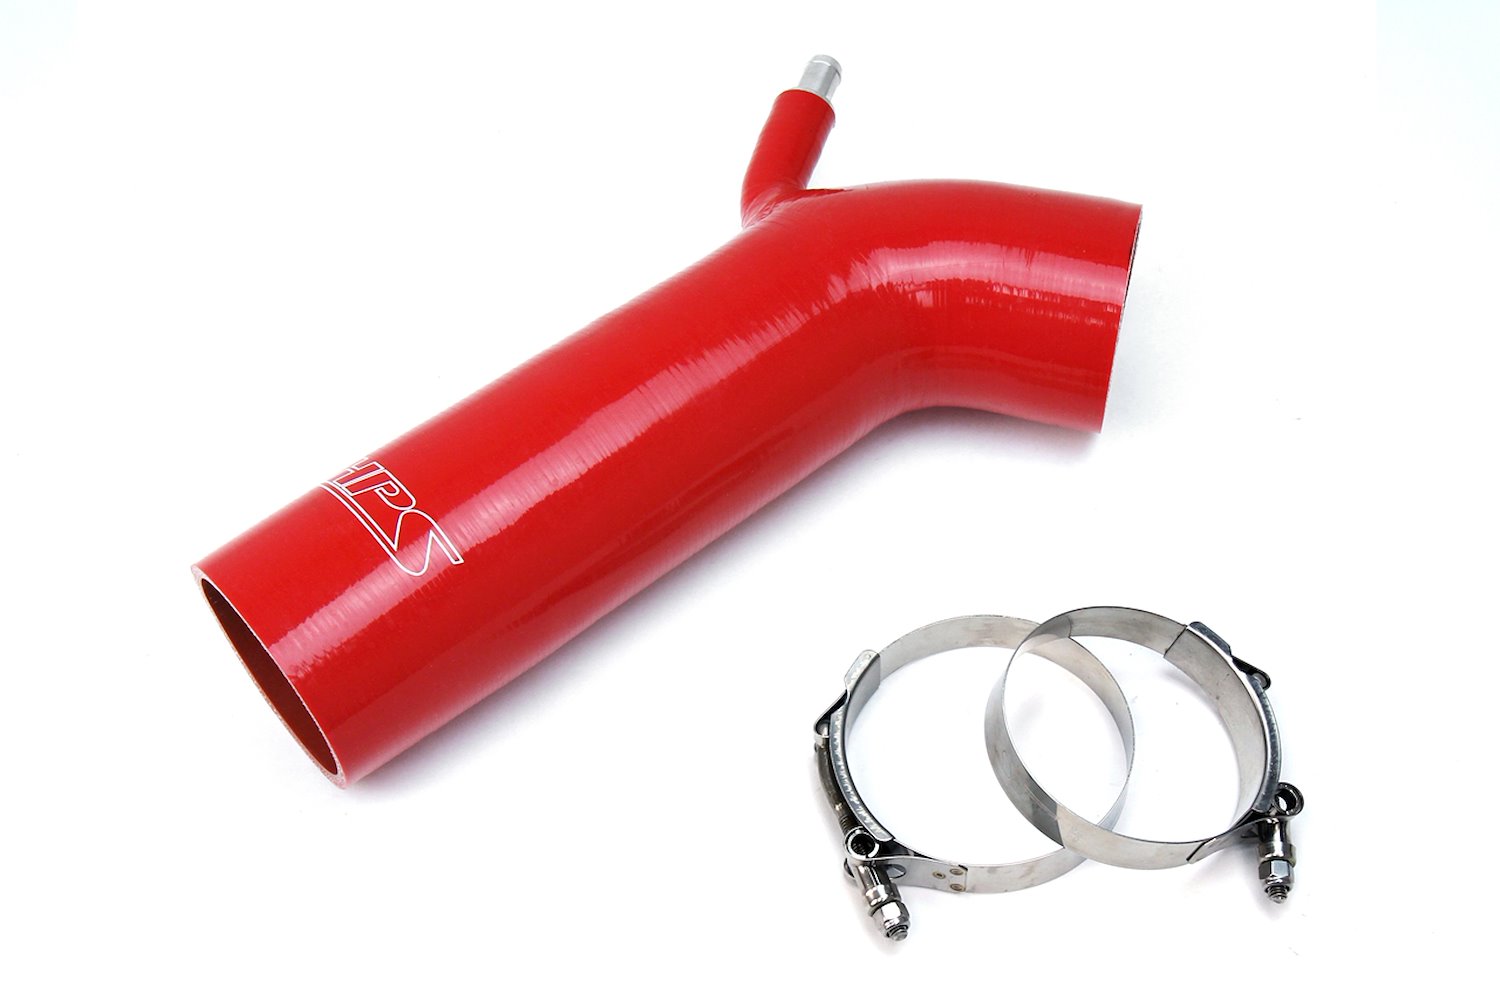 57-1232-RED Silicone Air Intake, Replace Stock Restrictive Air Intake, Improve Throttle Response, No Heat Soak